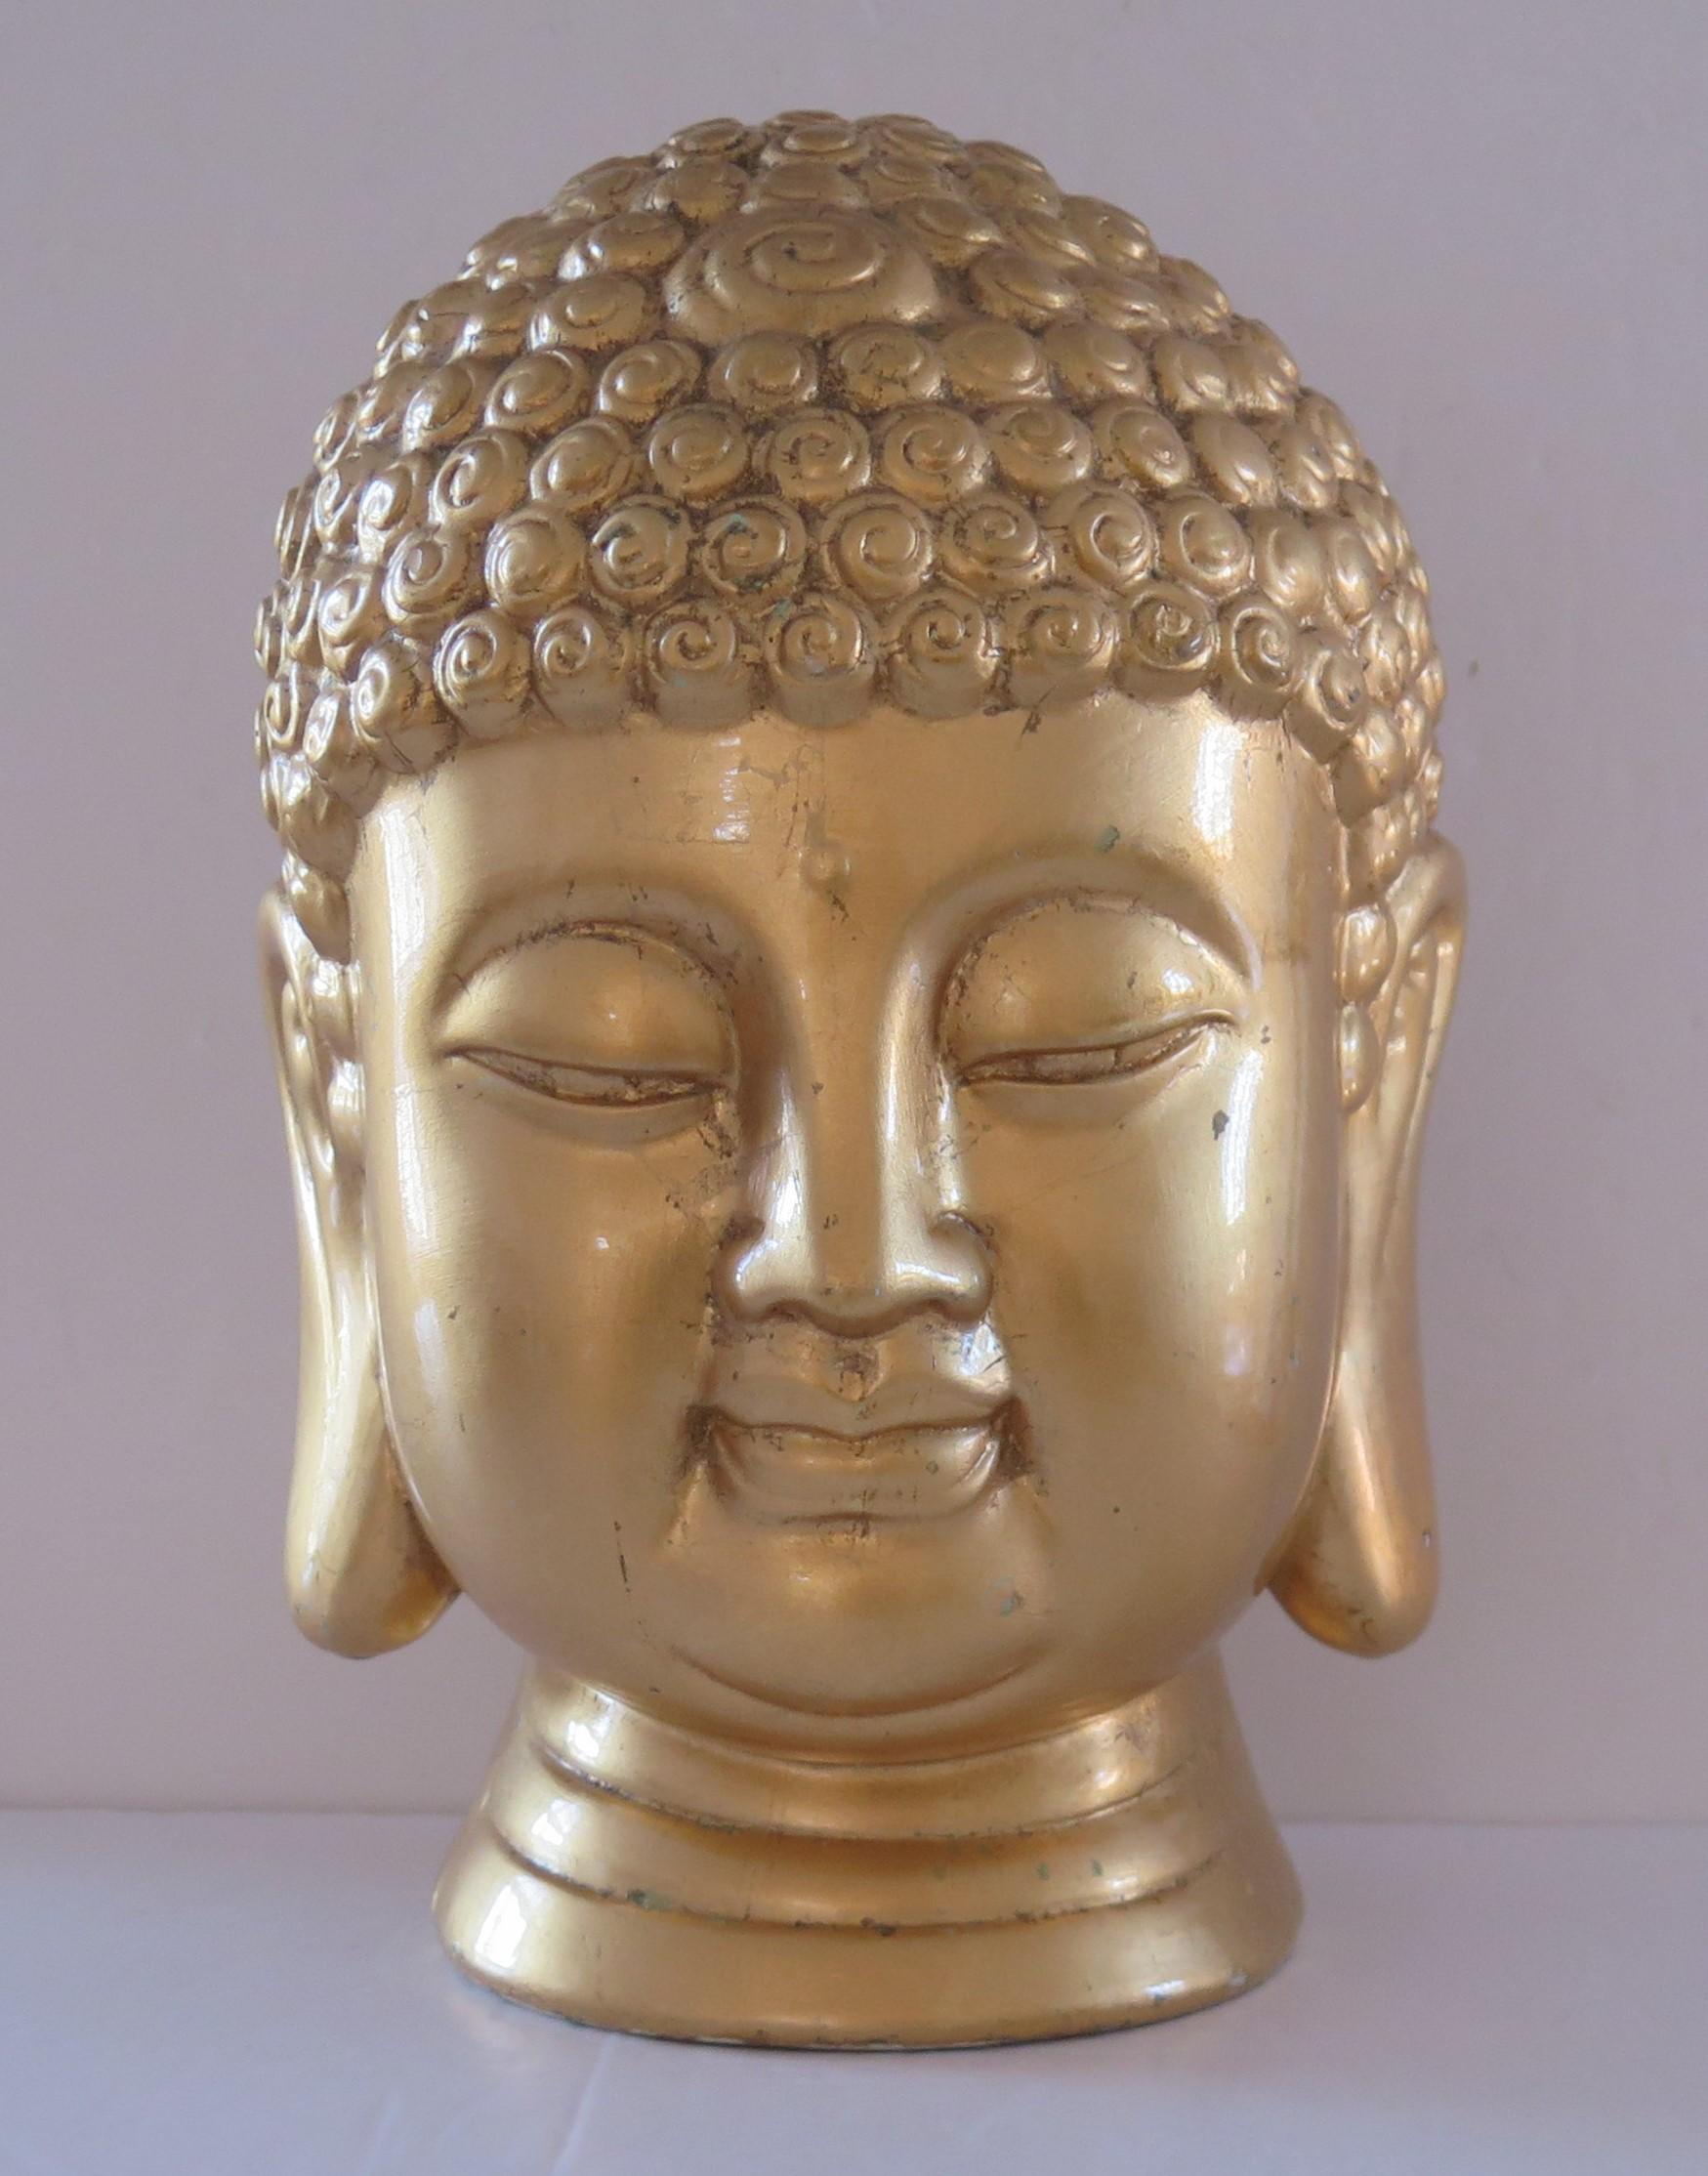 This is a very good large head or bust statue or sculpture of Buddha, possibly Chinese or Japanese, which we date to the first half of the 20th century, circa 1920s.

The large head is well formed with good detail, with the entire head (apart from